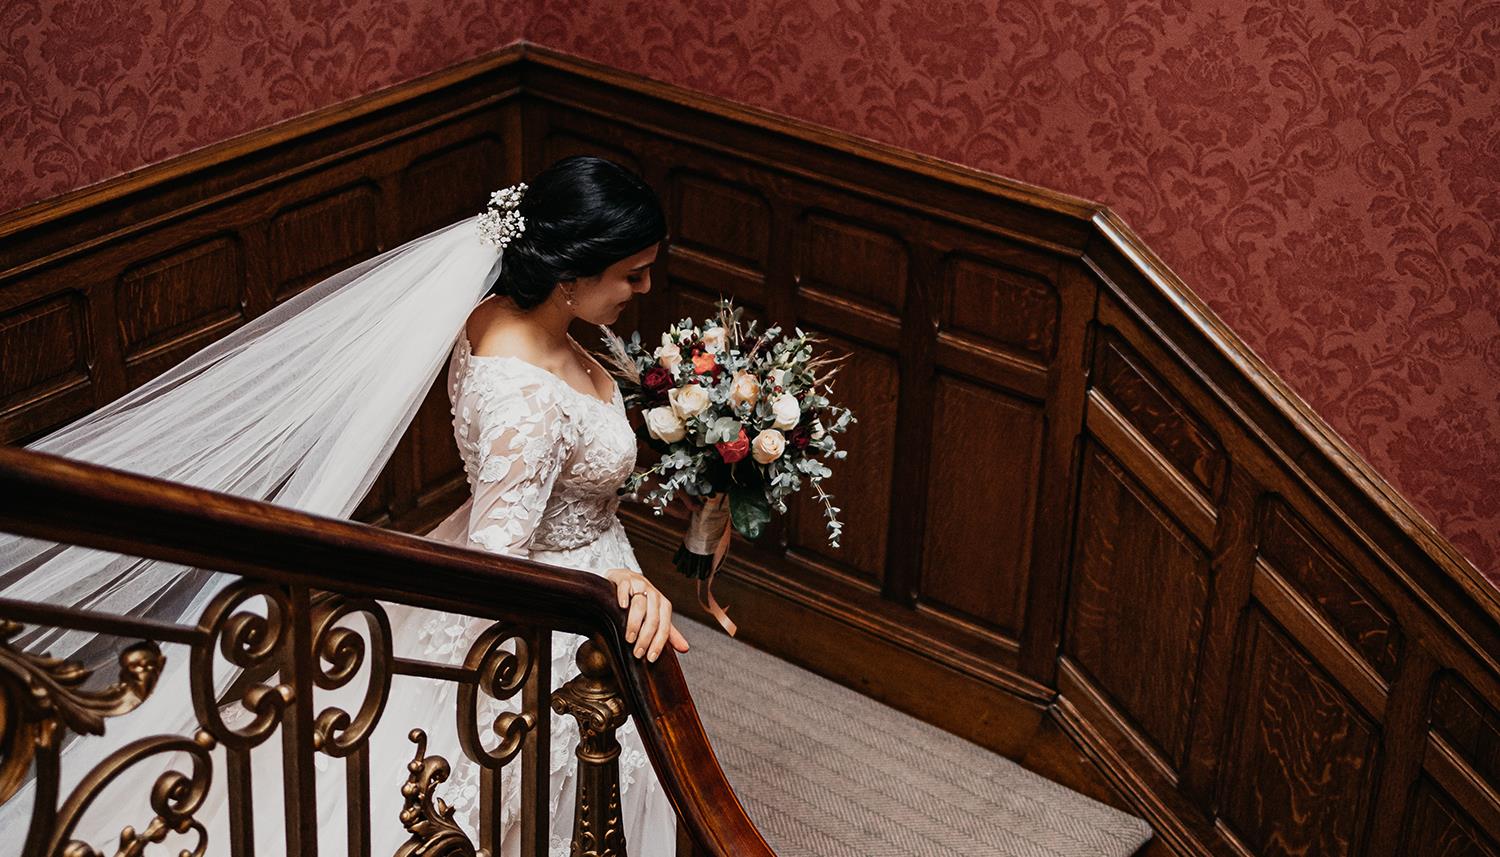 Bride descending stairs. Photo Credit: Mark Keogh Photography